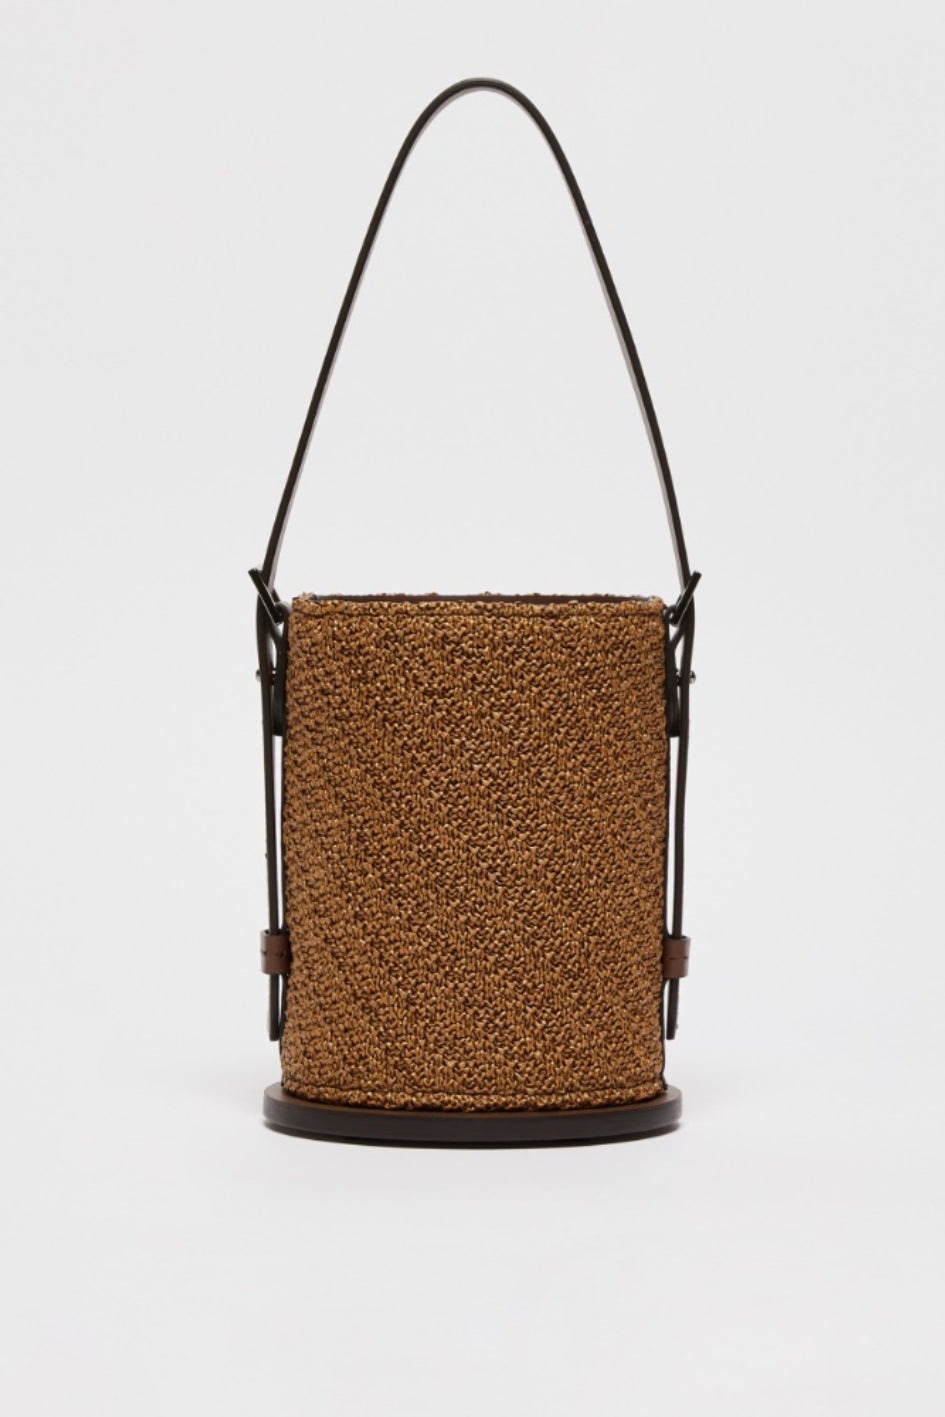 Archetipo Crocheted Pouch Bag